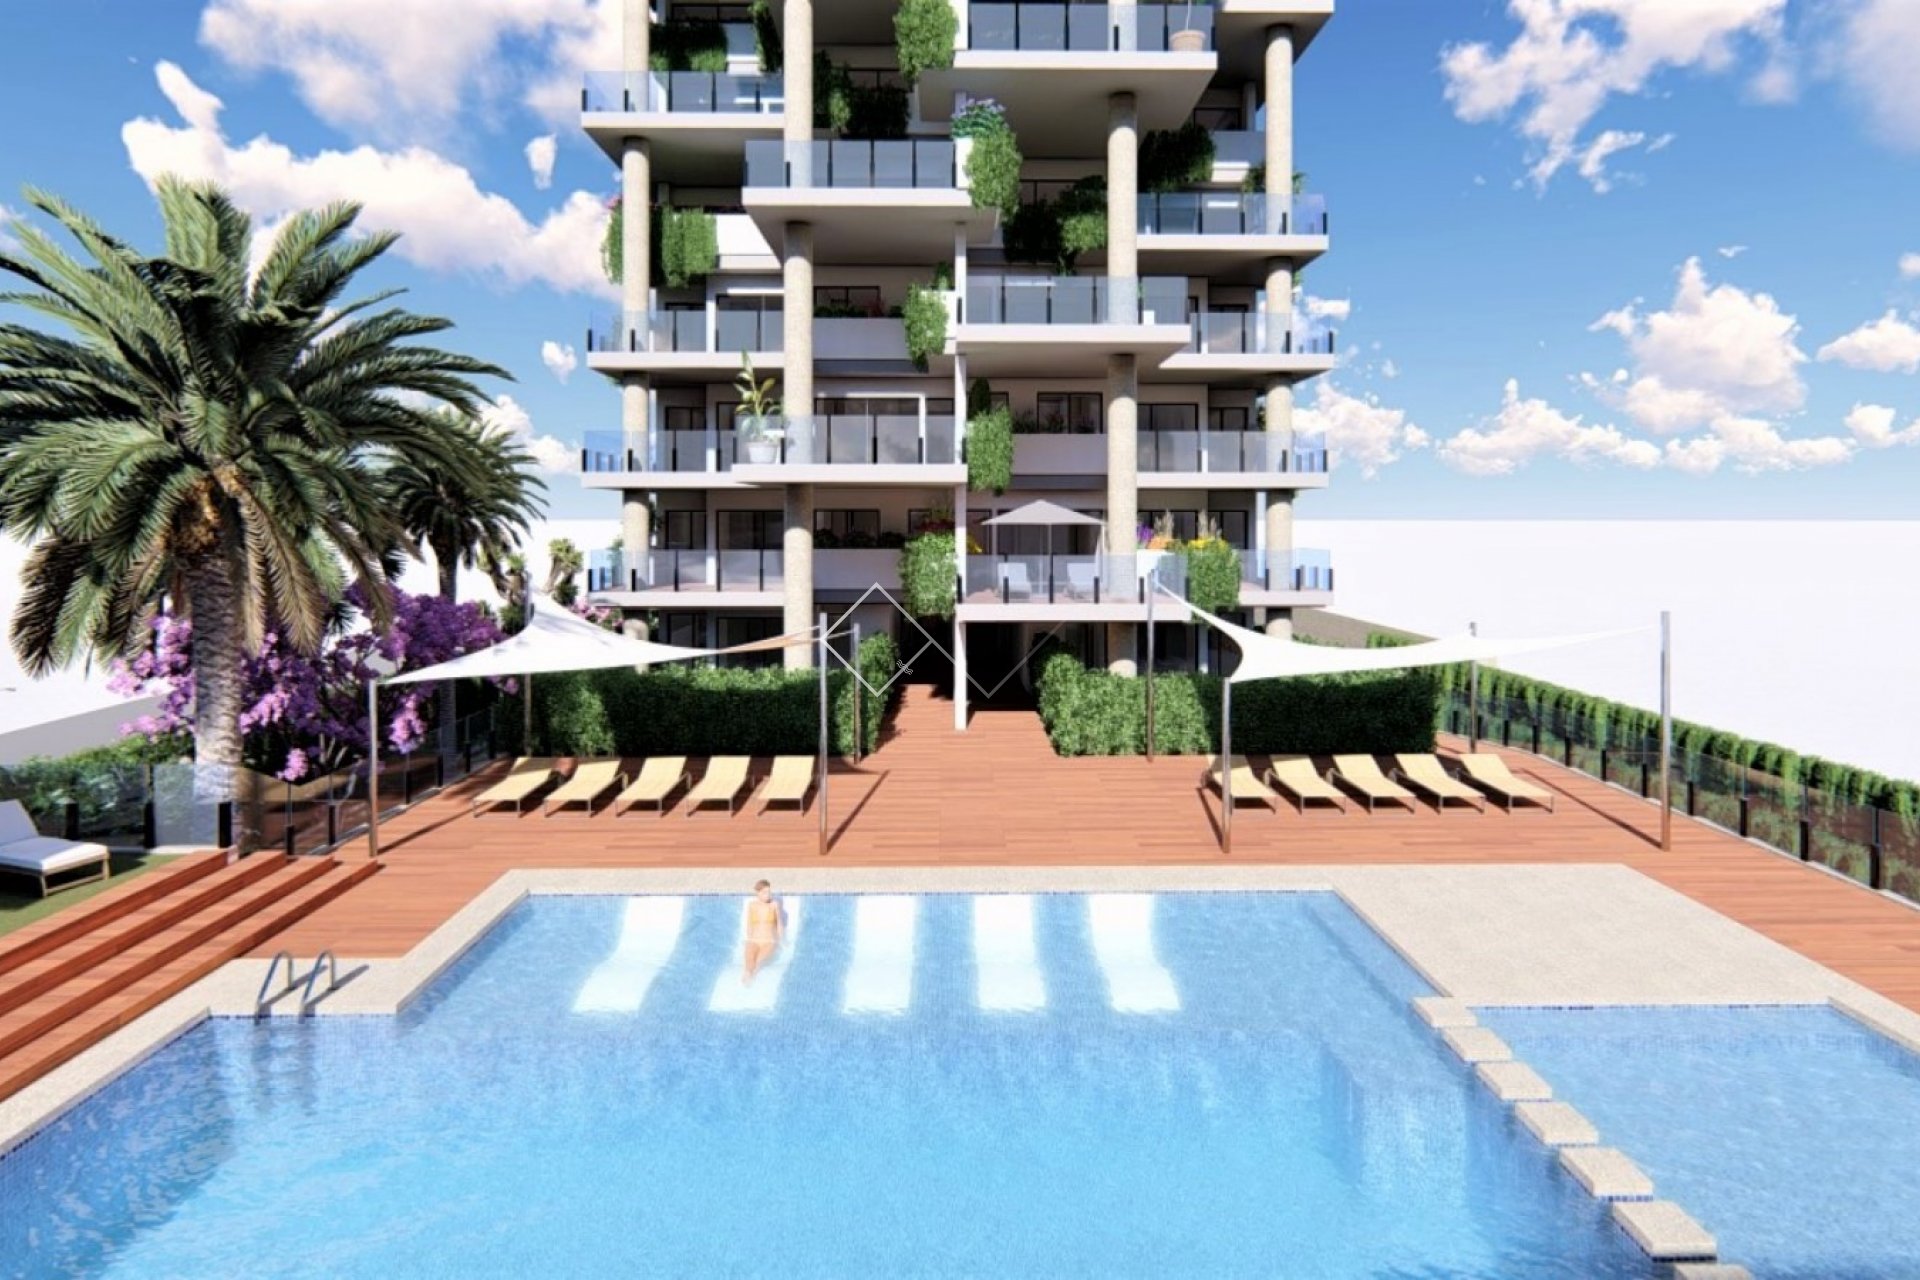 apartment and communal pool -New project: apartments in Calpe, 150m from beach